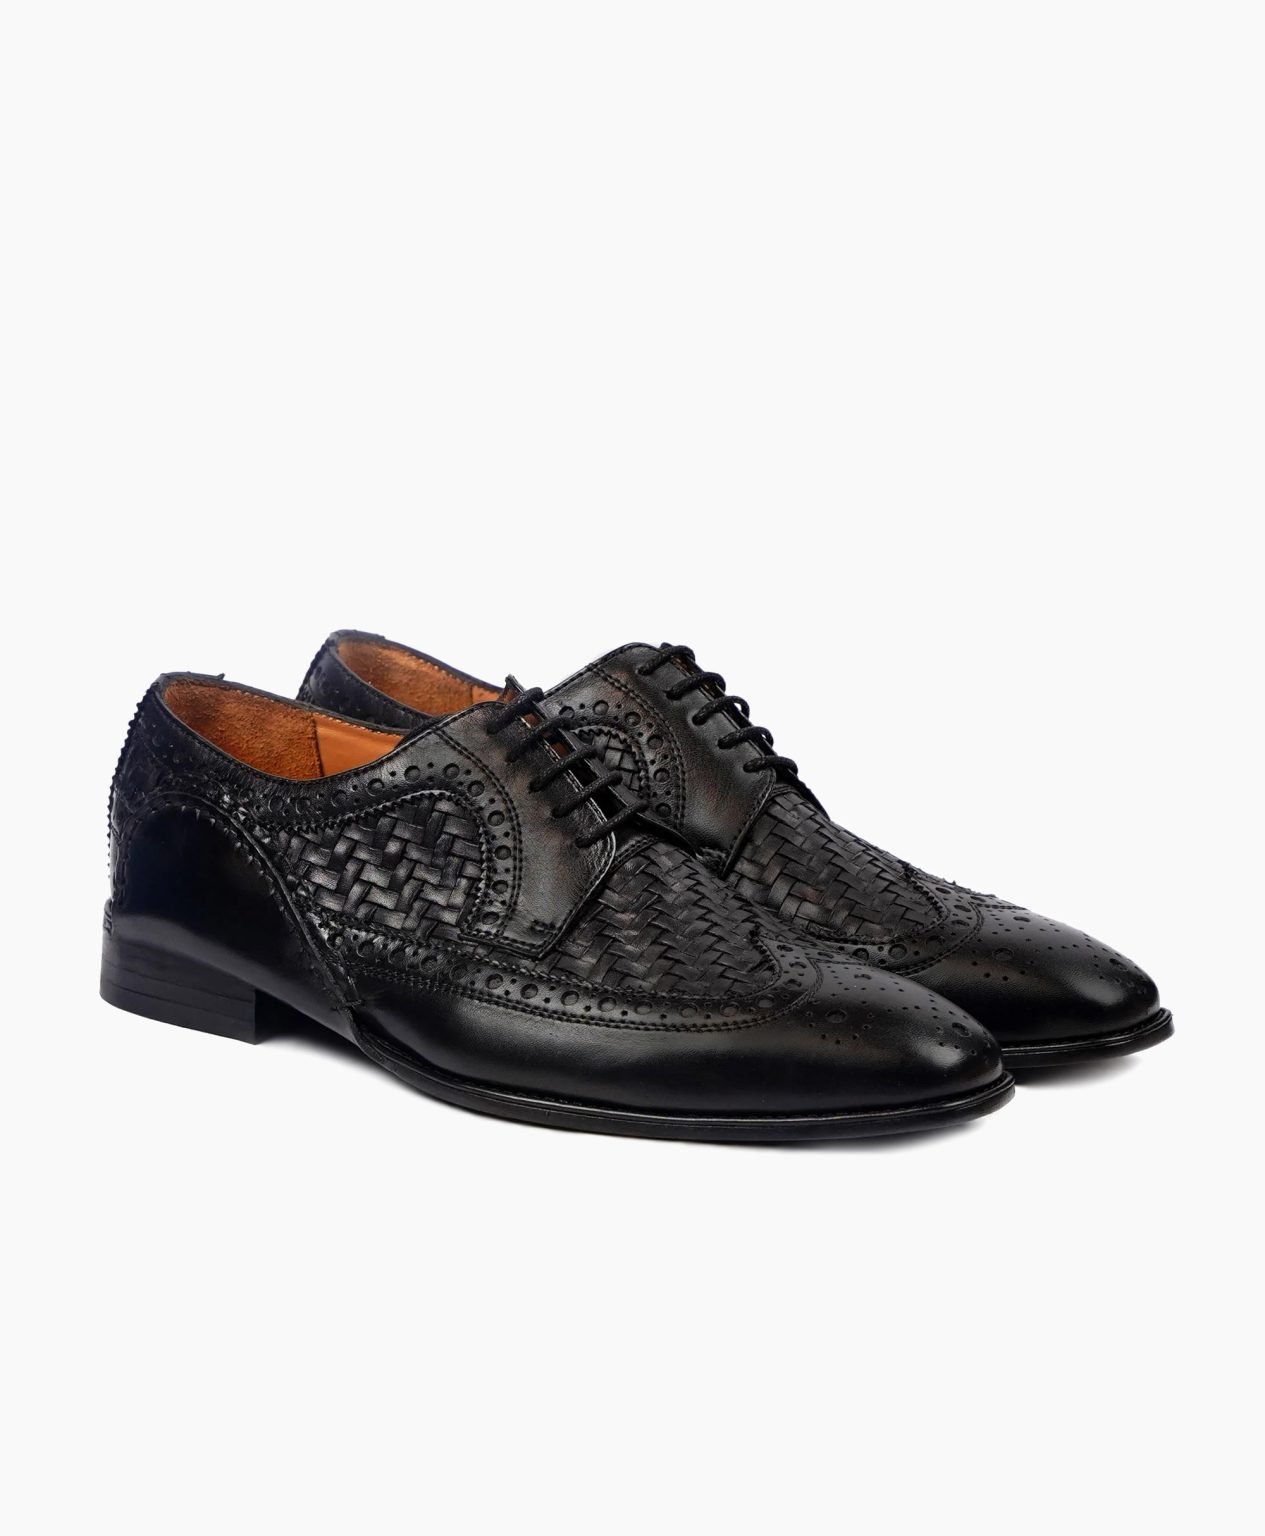 buxton-derby-black-woven-leather-shoes-image200